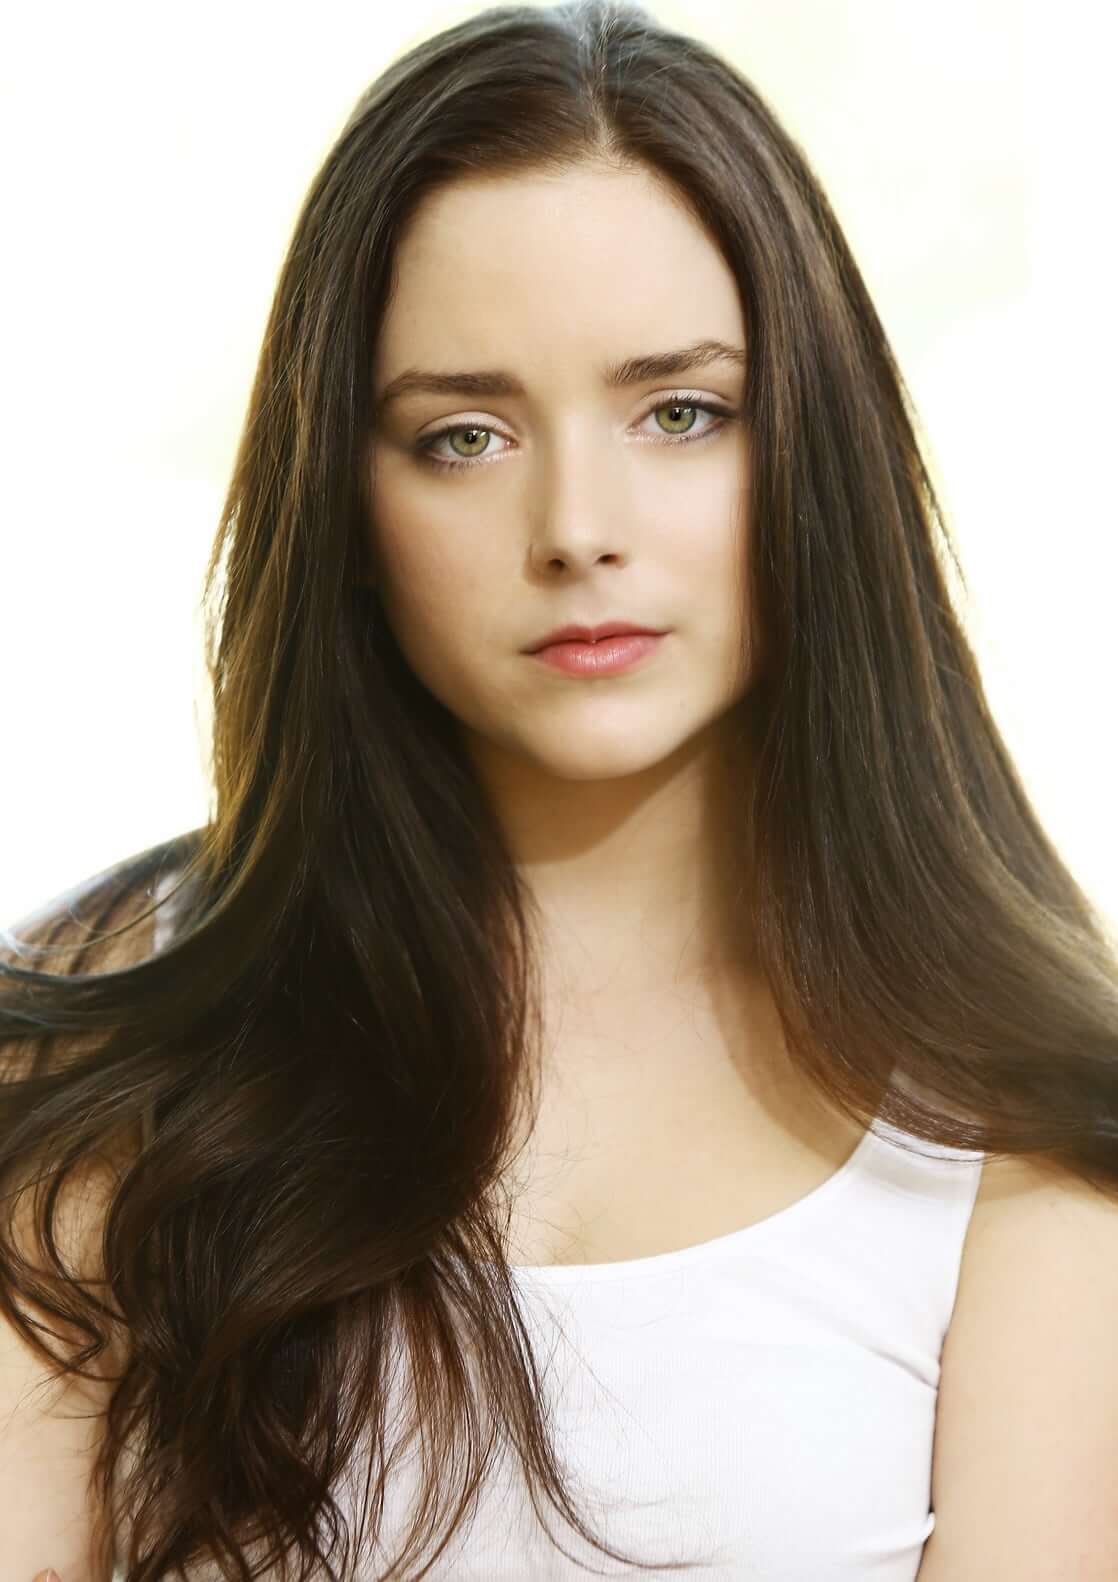 Hot Picture Of Madison Davenport Are Going To Cheer You Up